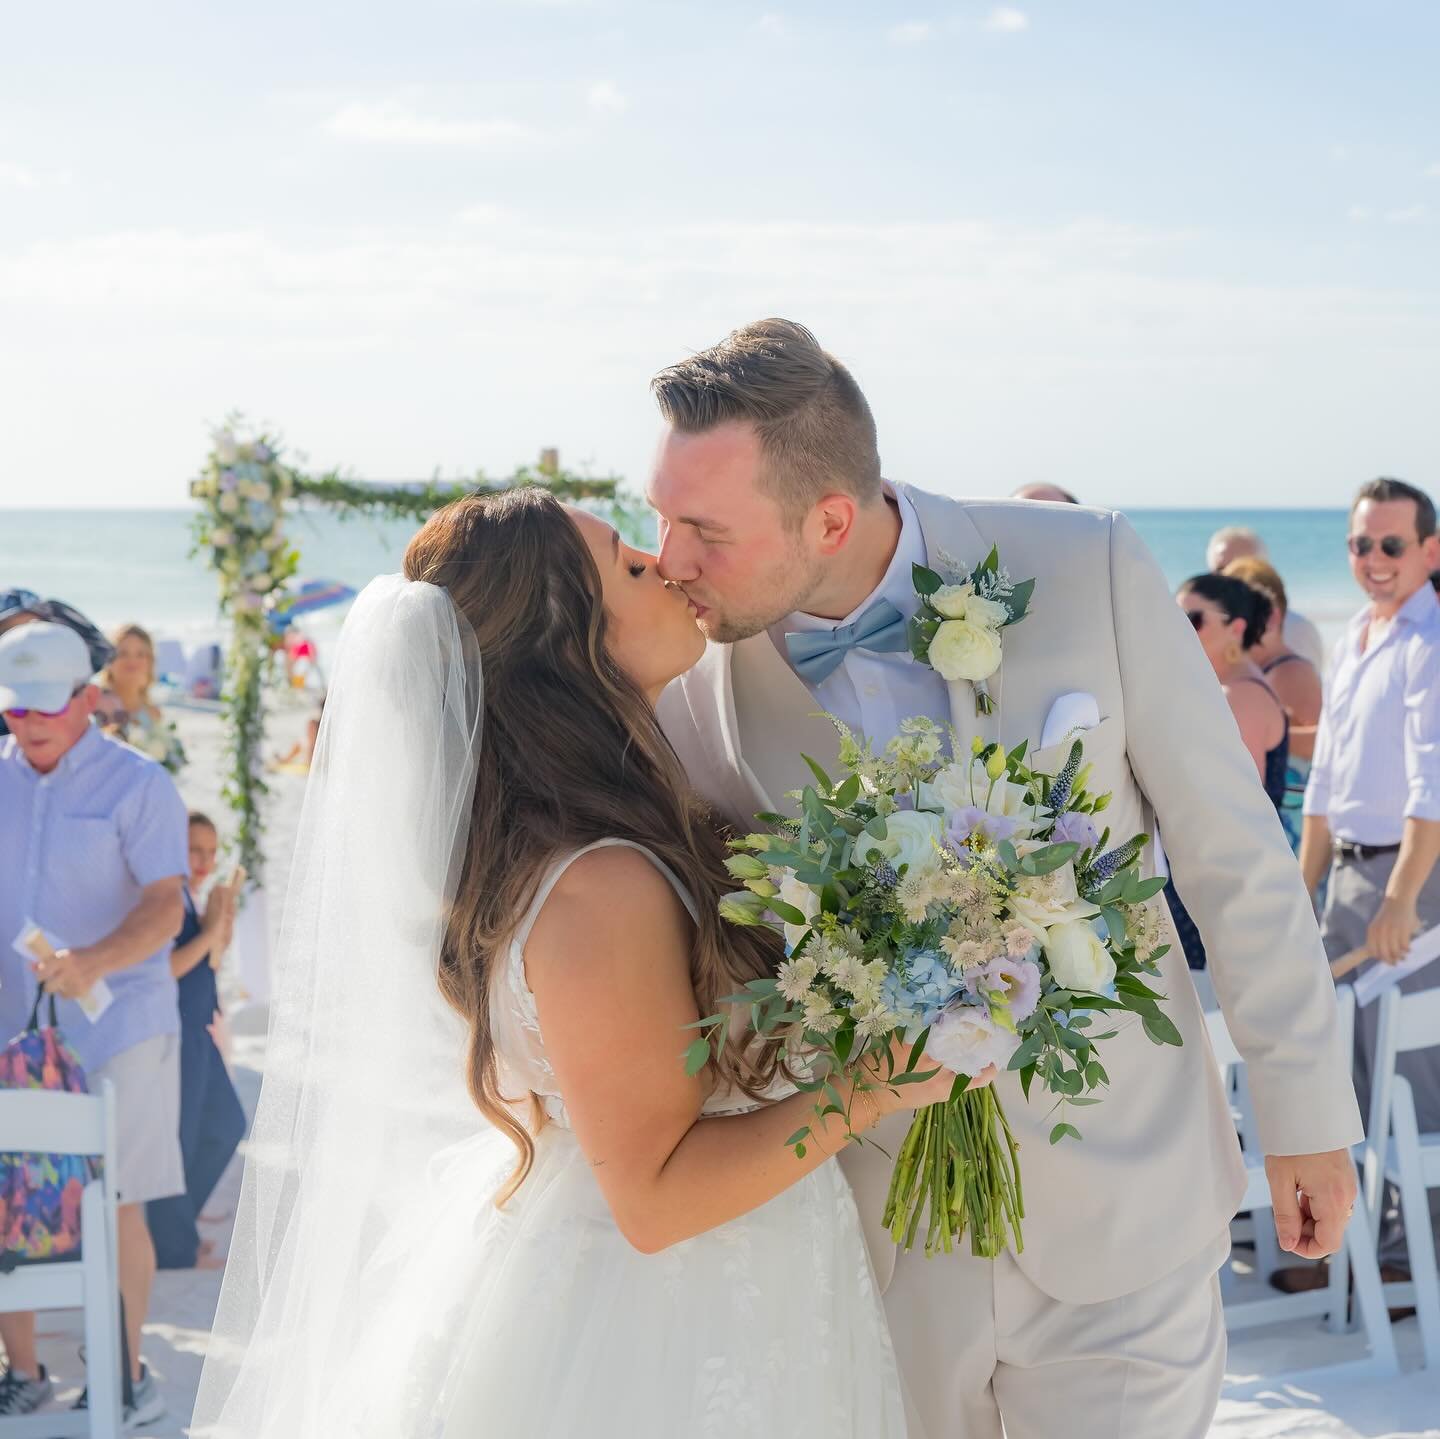 Congratulations to the Martins! Jennifer and Patrick tied the knot with a beautiful beach ceremony followed by a breathtaking reception at the Grand Pavilion at @thesandbarami. These lovely photos were captured by @sandhillphotography!

A huge thank 